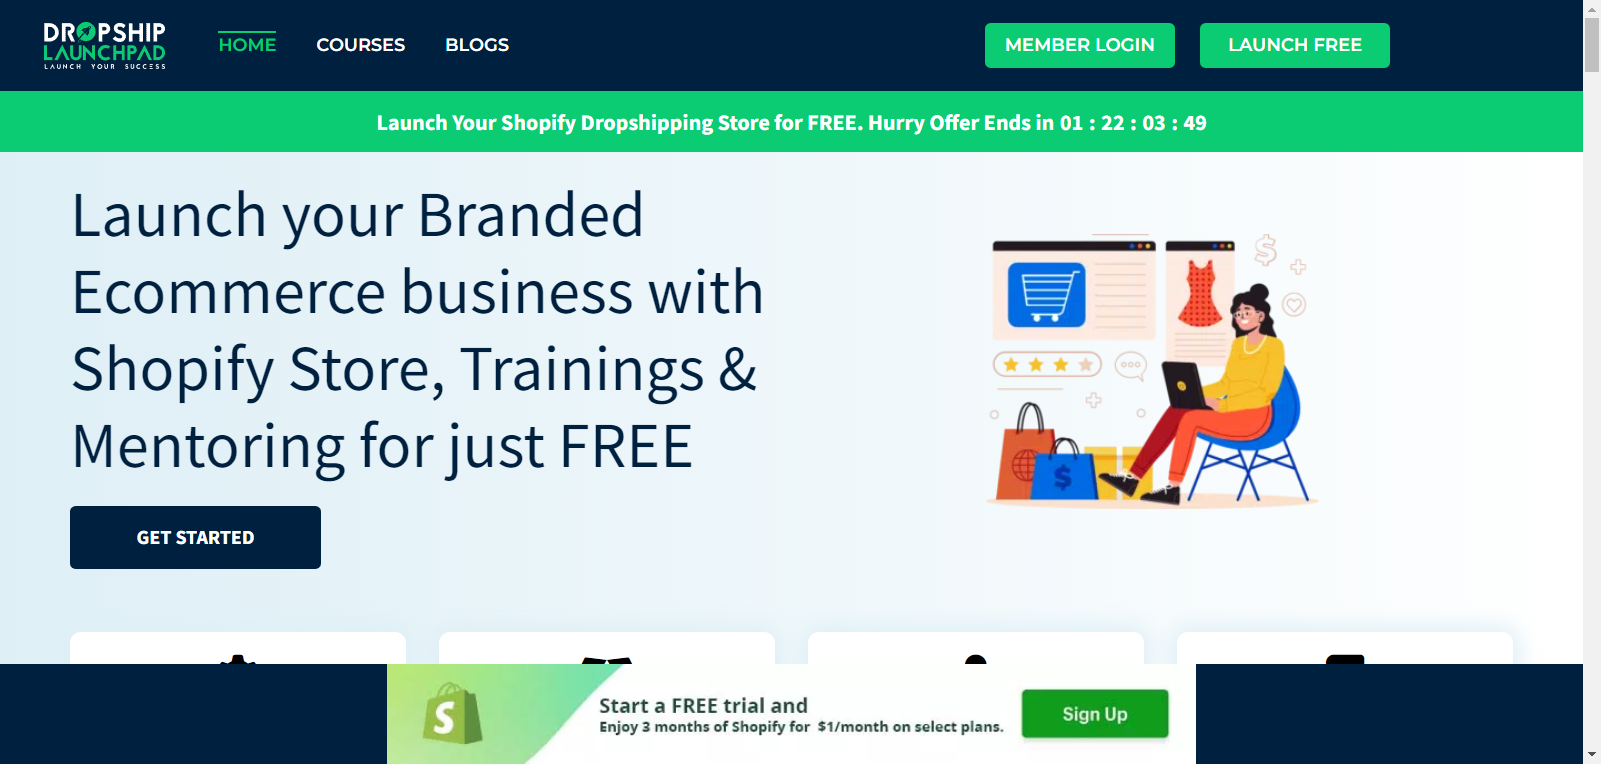 Advantages of Dropship Launchpad Shopify Gadget Stores